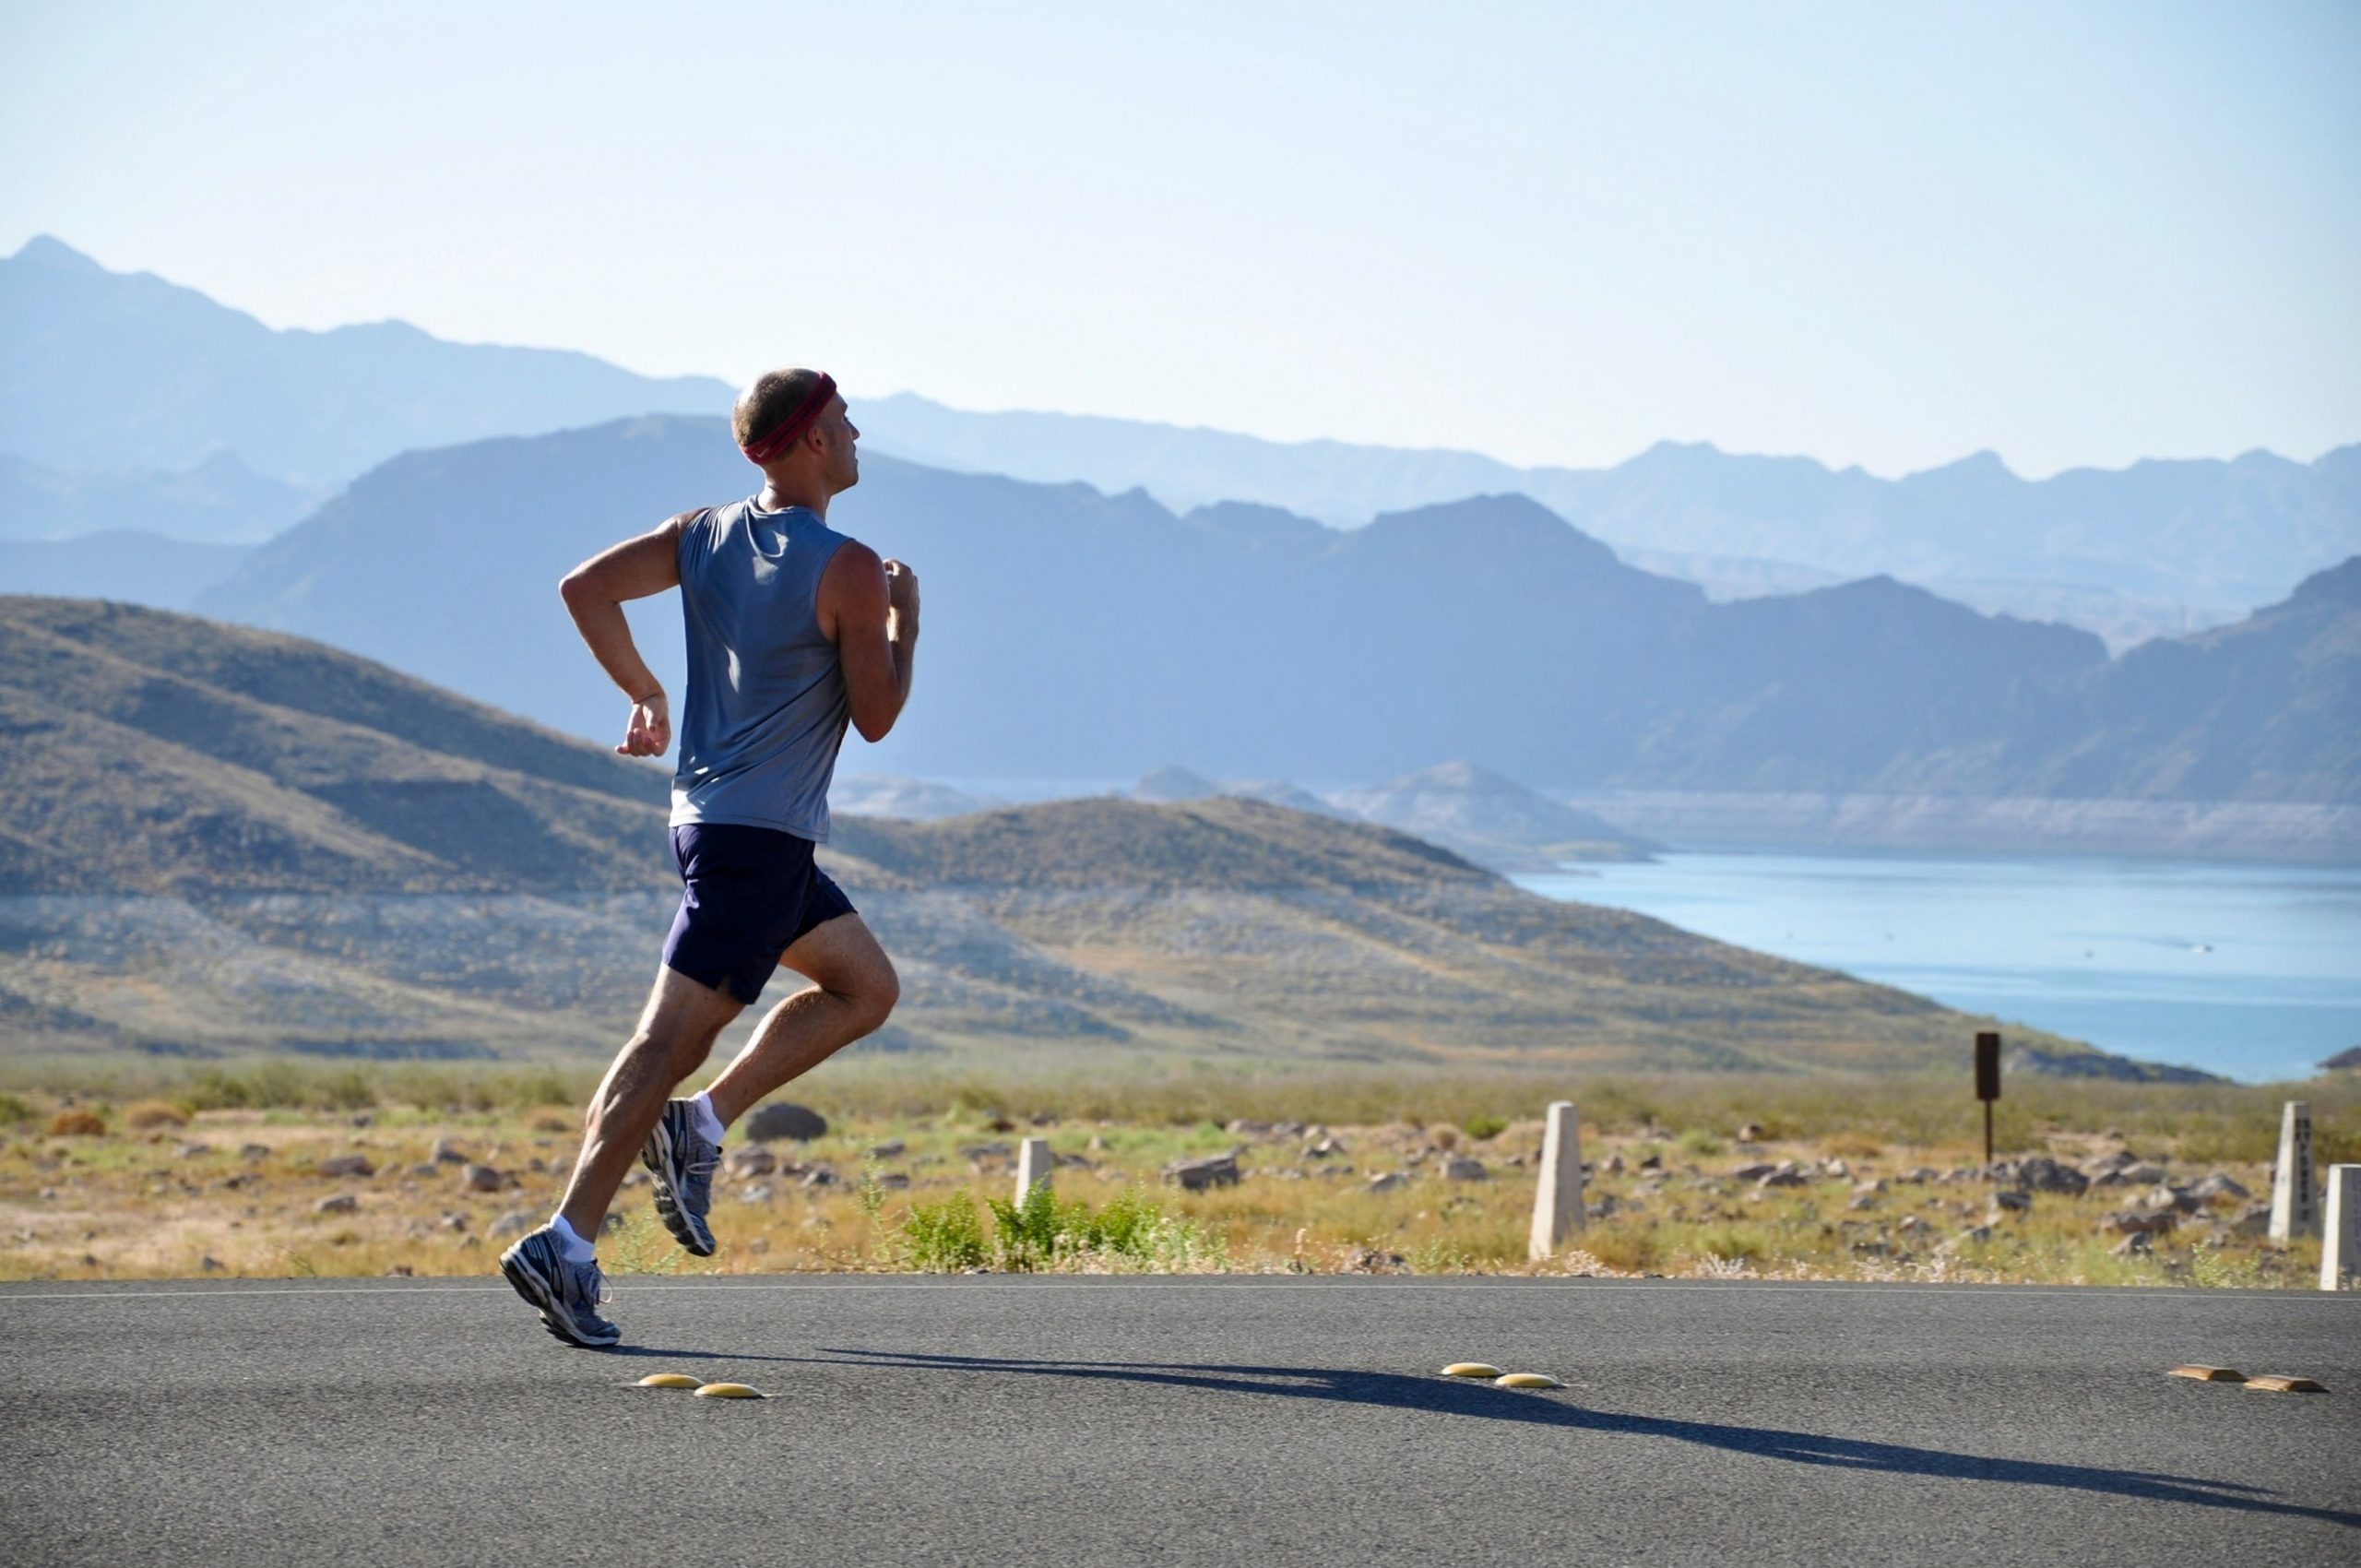 Treadmills vs Running Outdoors – What is the Difference